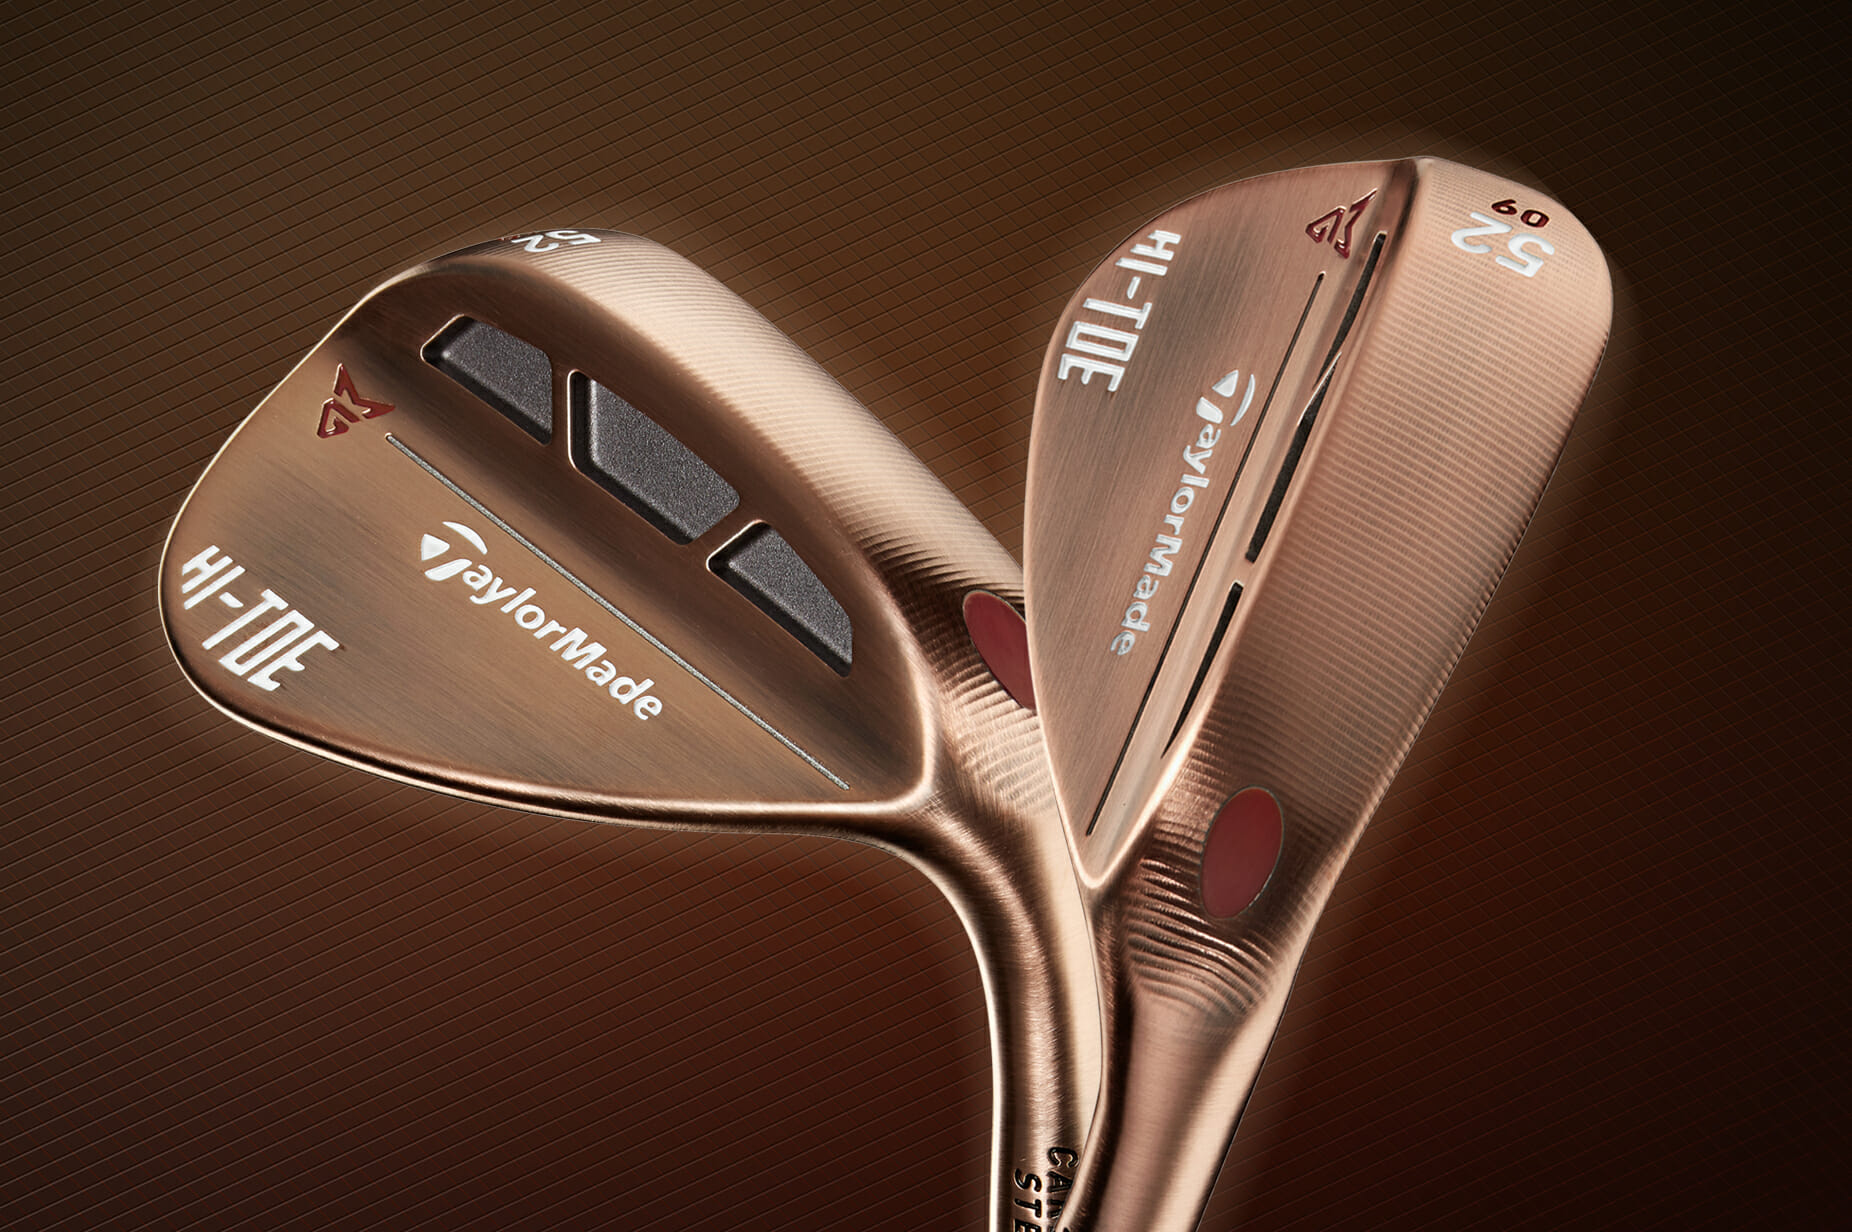 TaylorMade expand its popular Hi-Toe wedge options